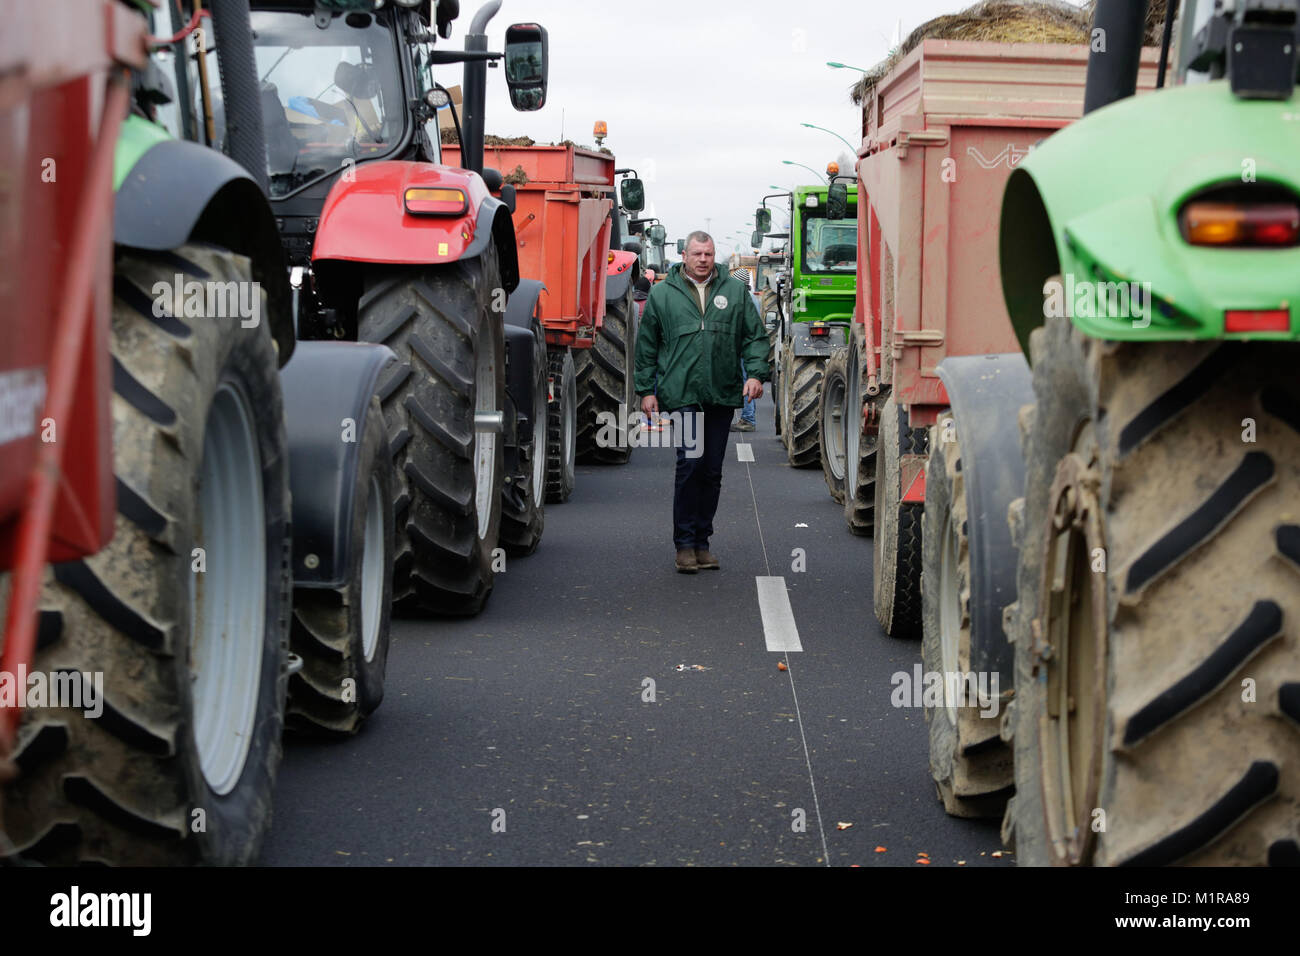 Toulouse, France. 31st Jan, 2018. A farmer and tractors are seen on a highway during a demonstration in Toulouse, France, Jan. 31, 2018. Farmers set up a filter dam on Wednesday to slow down traffic to protest against the decrease of the subsidies allocated in the region. Credit: Jose Santos/Xinhua/Alamy Live News Stock Photo